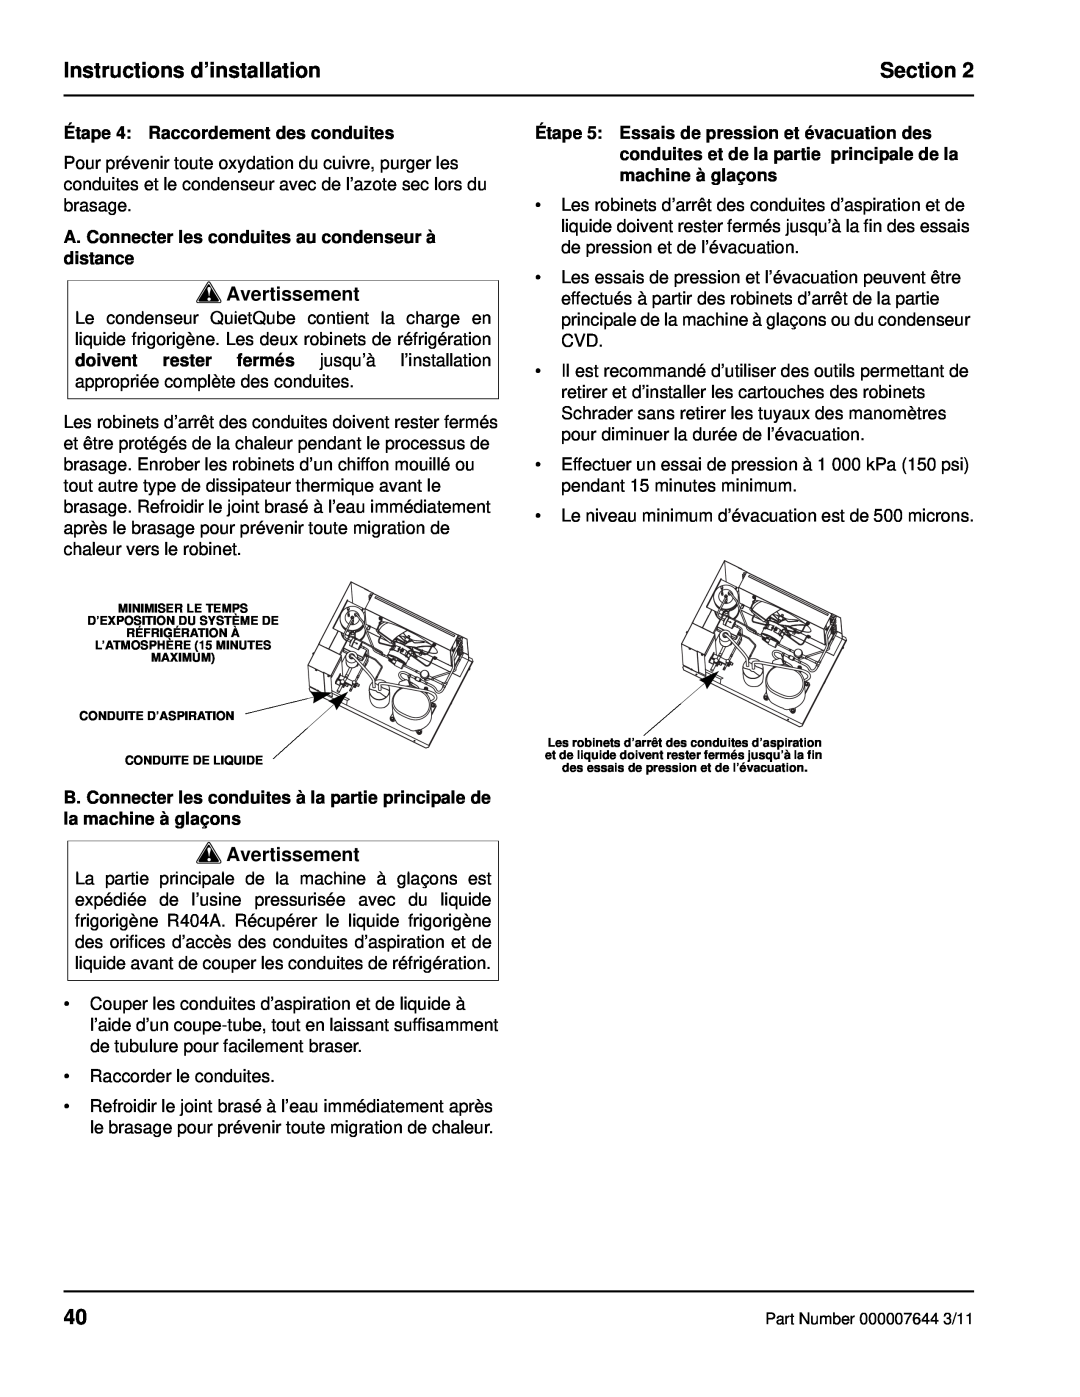 Manitowoc Ice RF manual Instructions d’installation, Section, Avertissement 